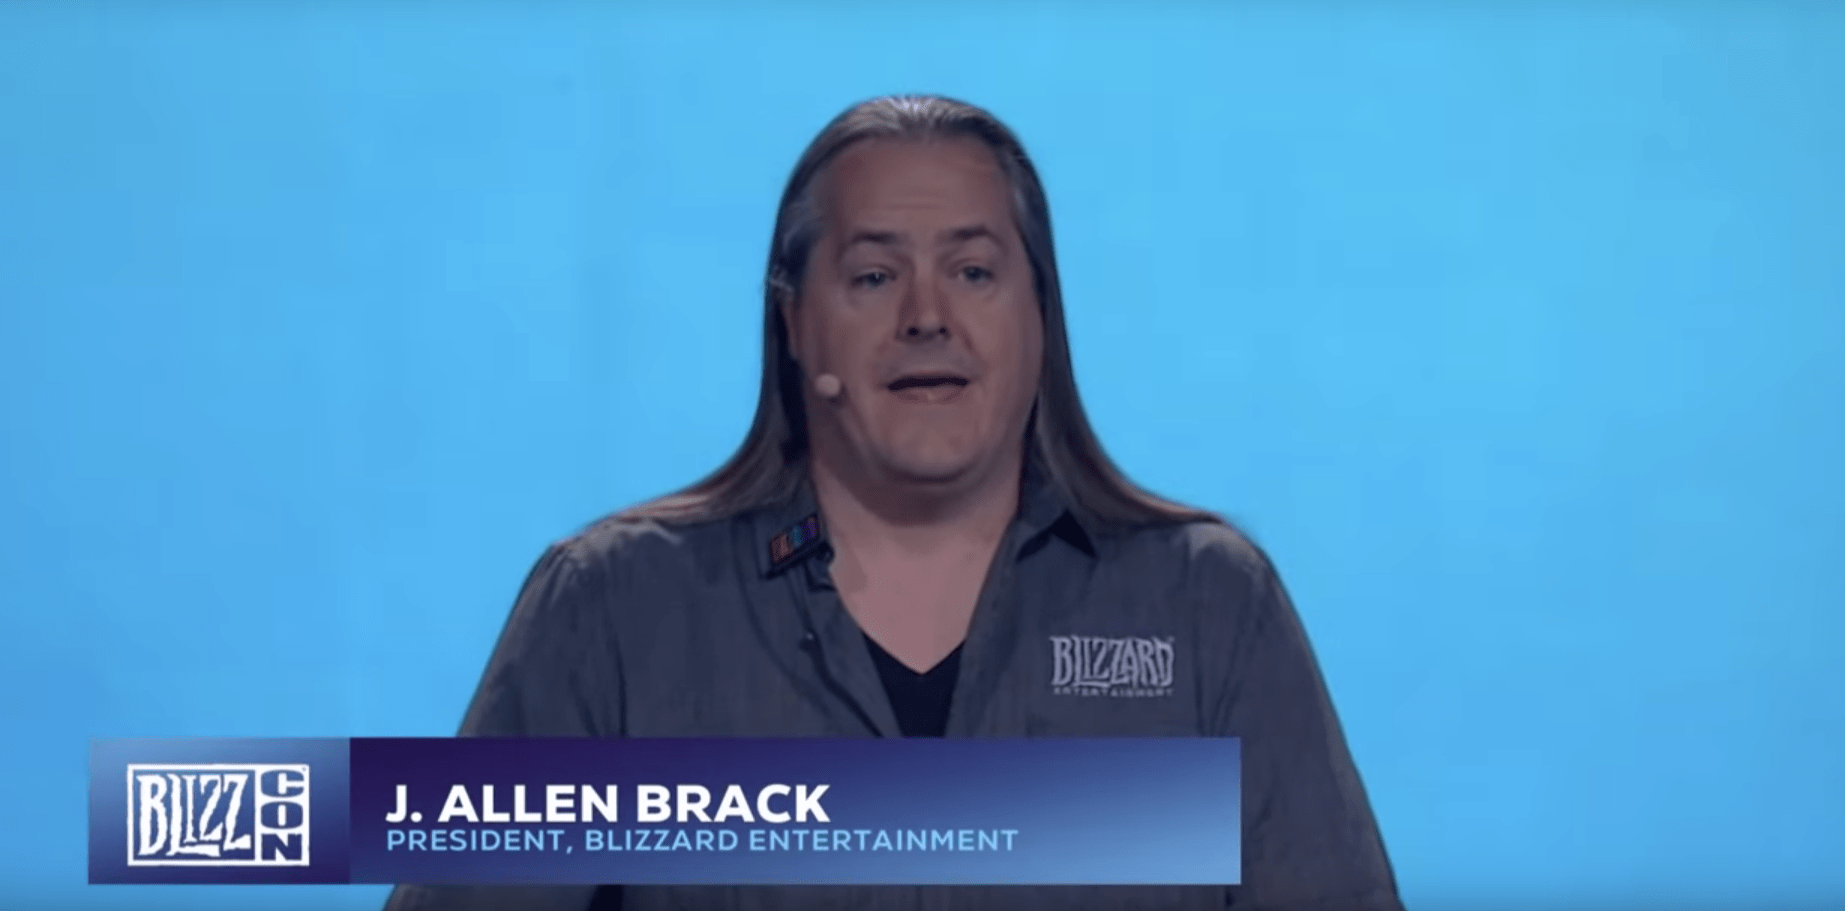 Blizzard President Explains His Stance On Blitzchung Banning After Blizzcon 2019 Apology